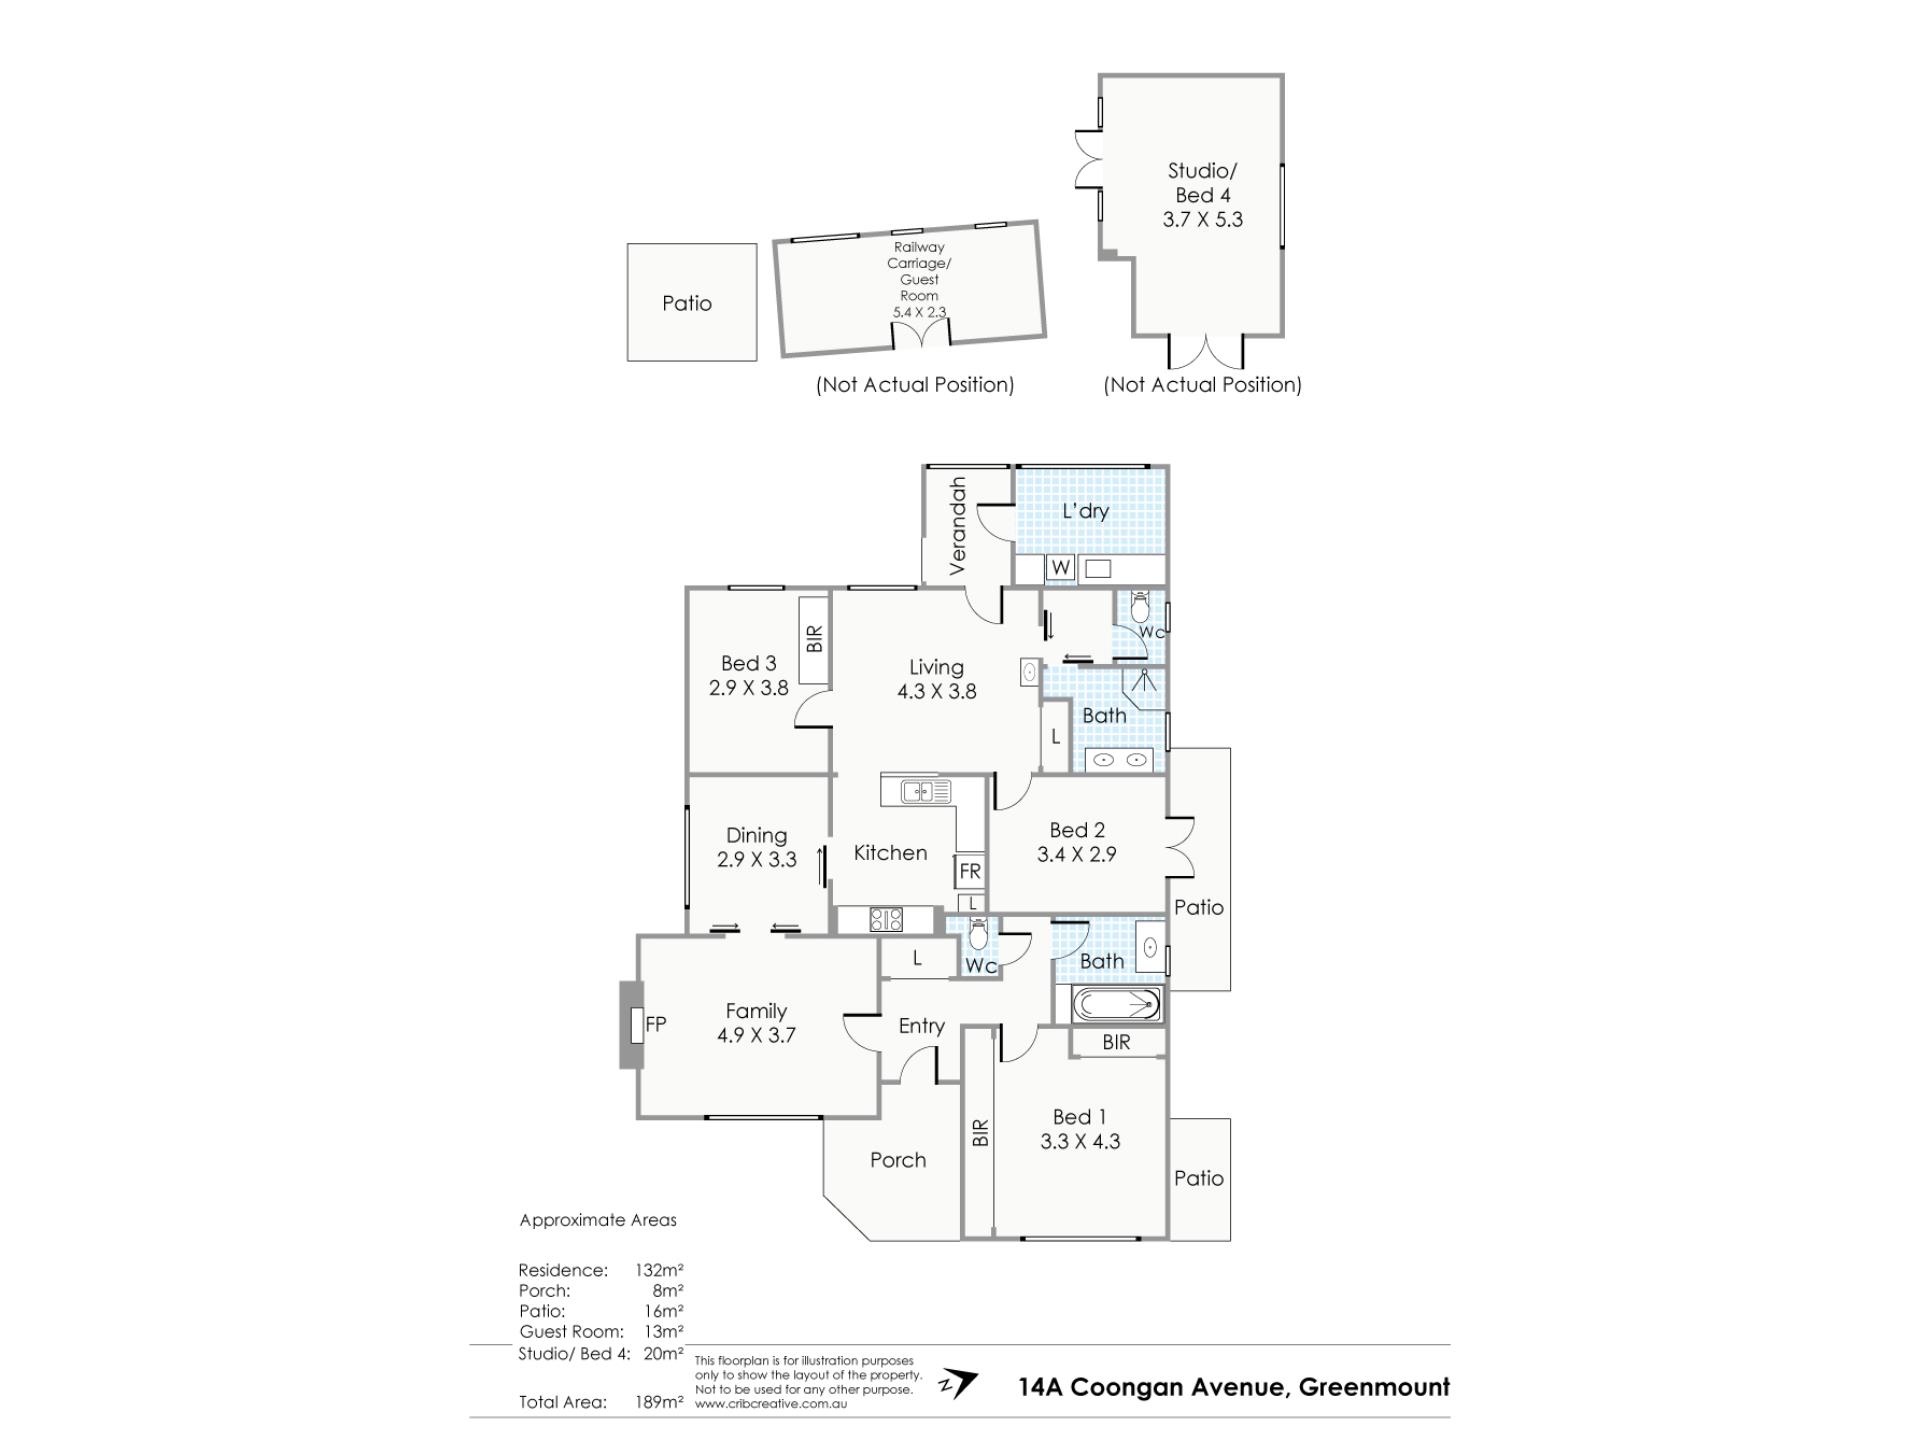 Property for sale in Greenmount : Earnshaws Real Estate